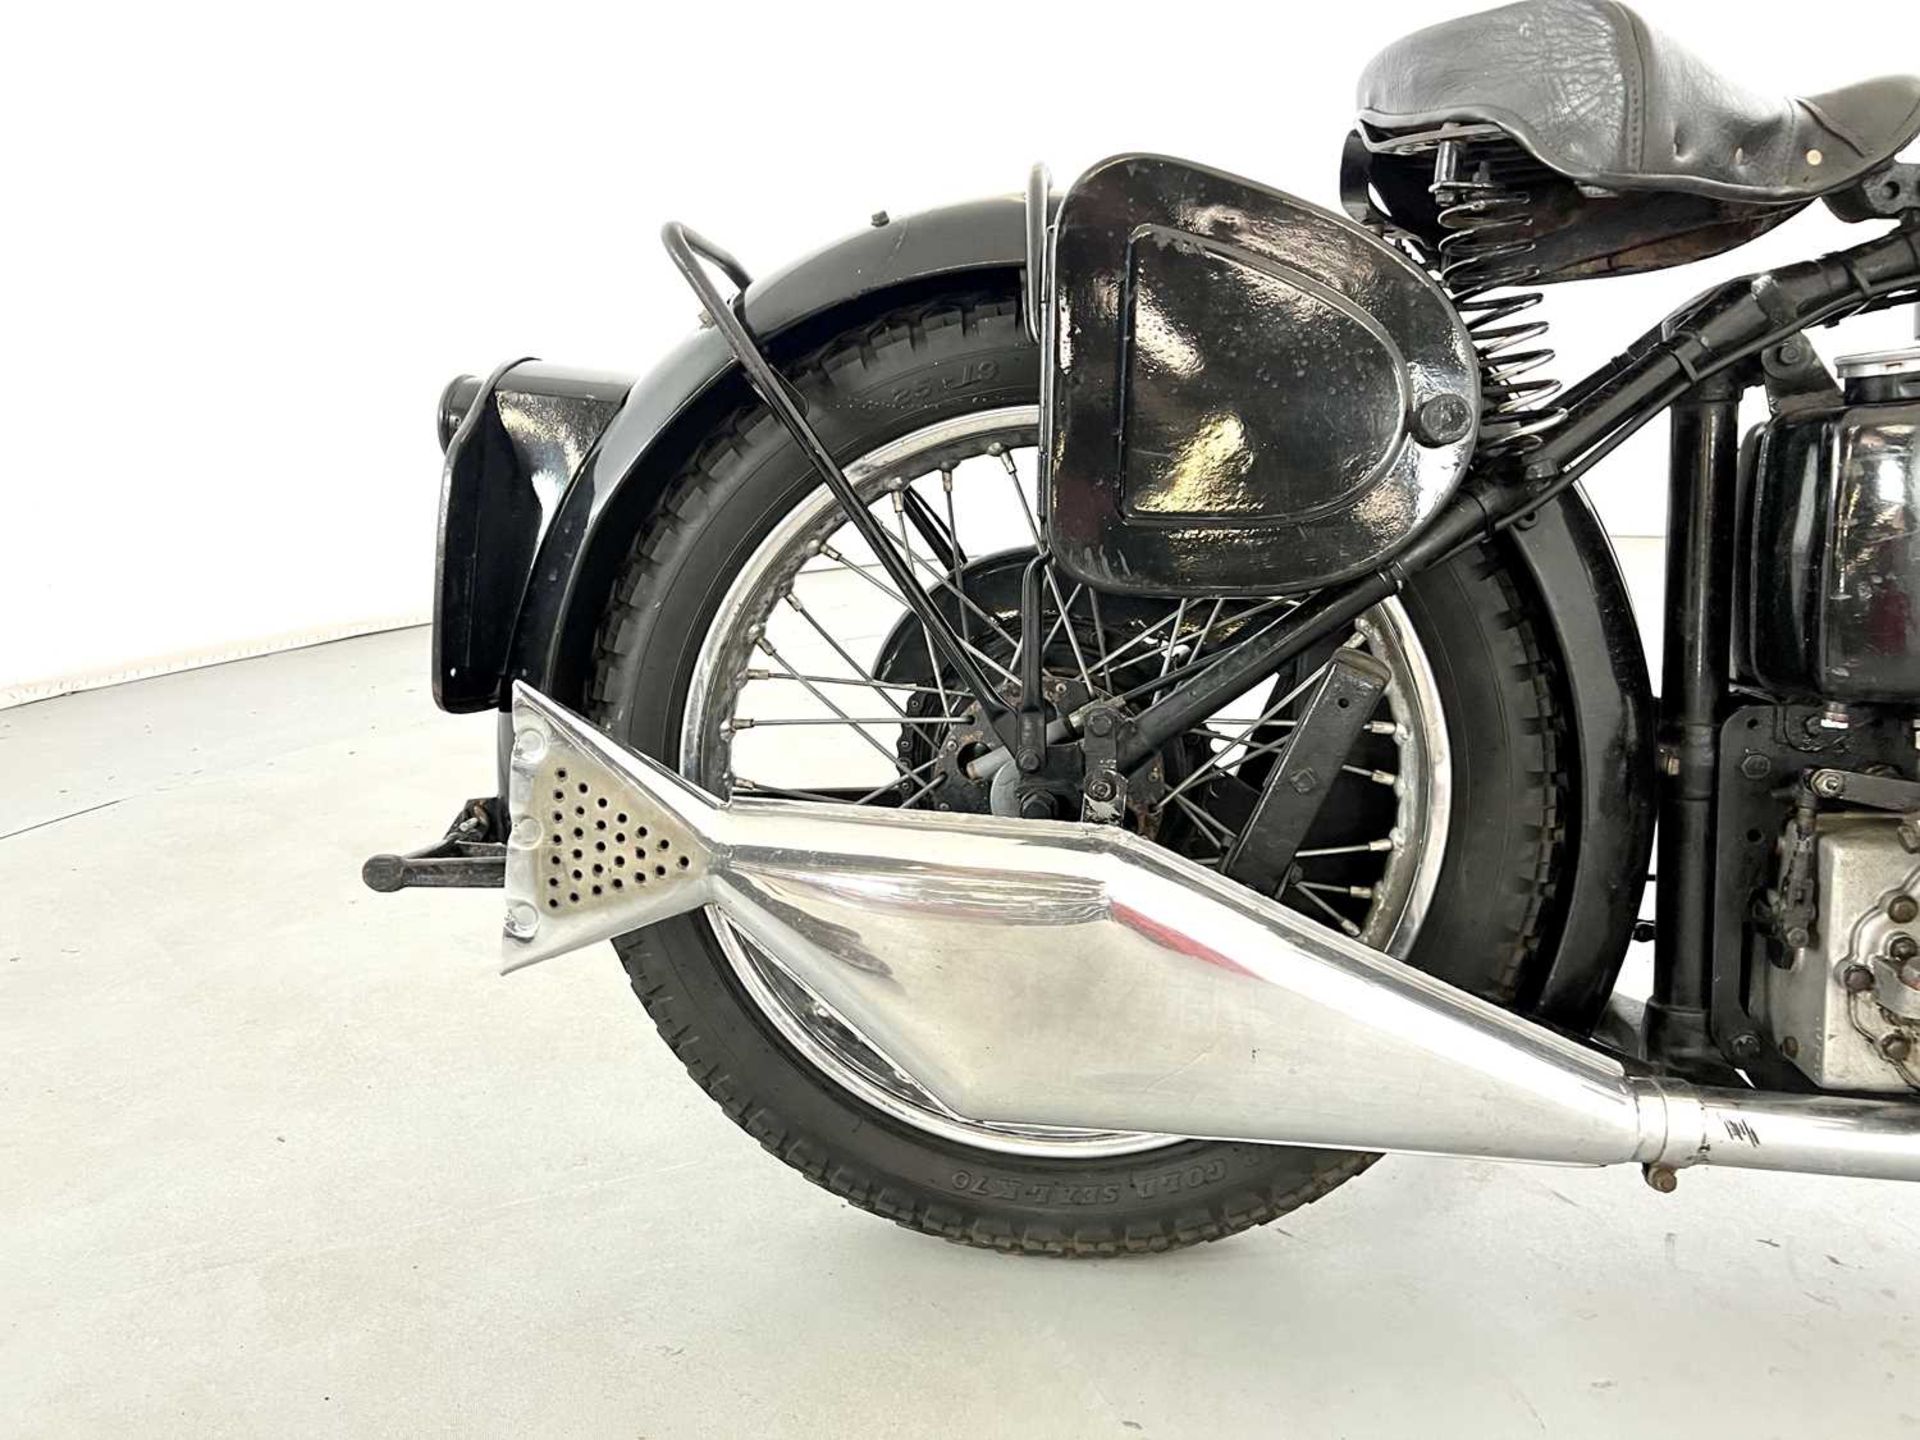 1948 Velocette MSS - Image 10 of 16